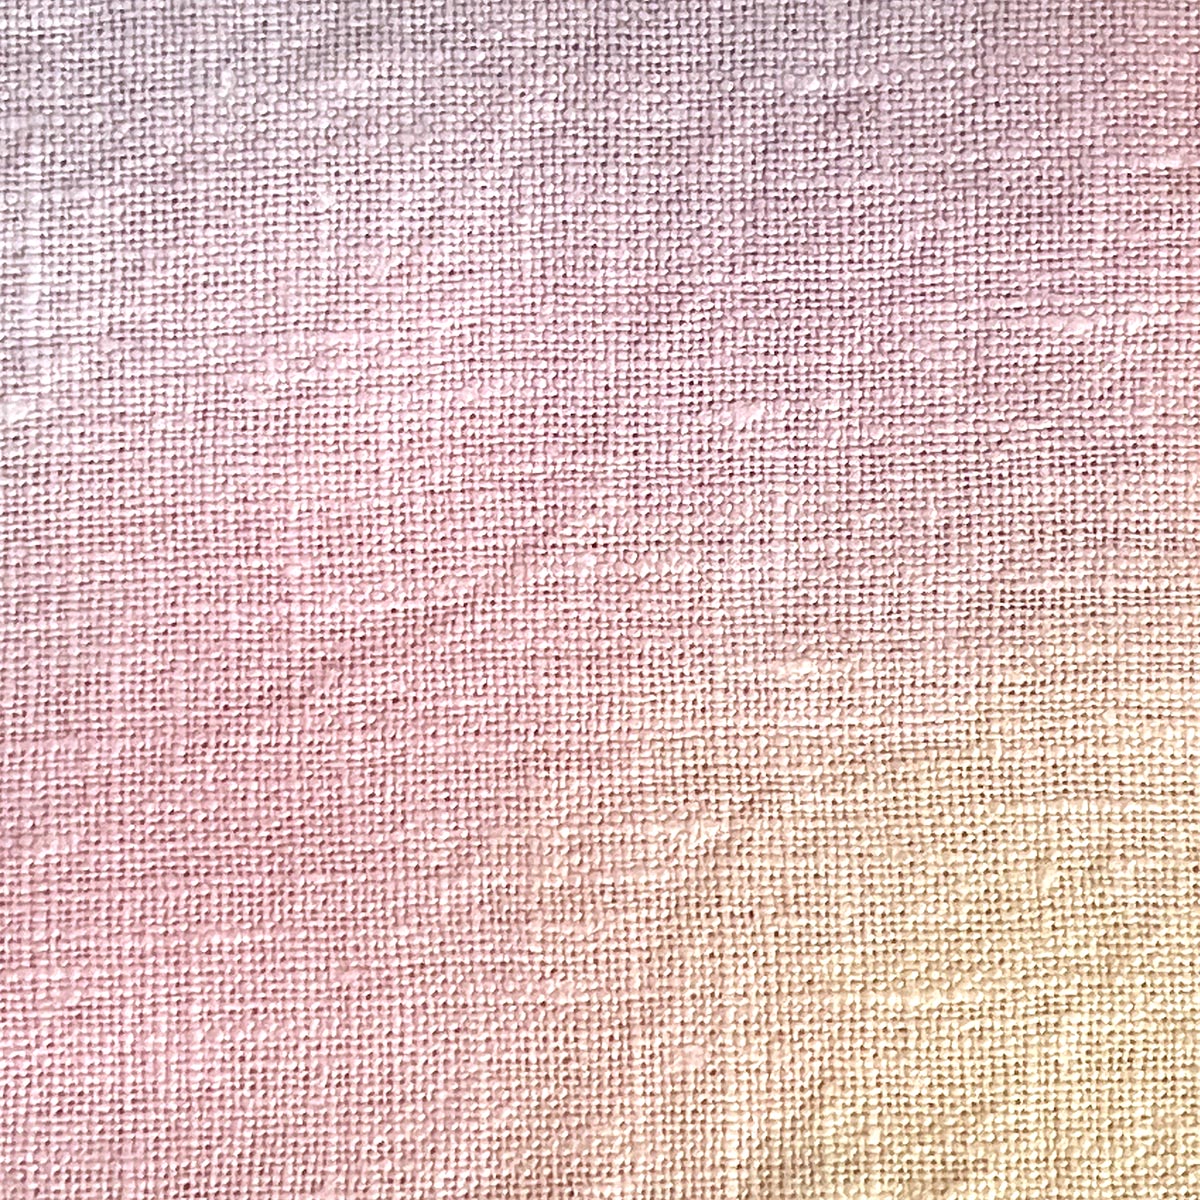 www.colourstreams.com.au Colour Streams Linen 36 Count Hand Dyed Dawn DL 12 Yellows Purples Pinks Embroidery Cross Stitch Textile Arts FIbre Embroidery Slow Stitching Counted Meditative Australia